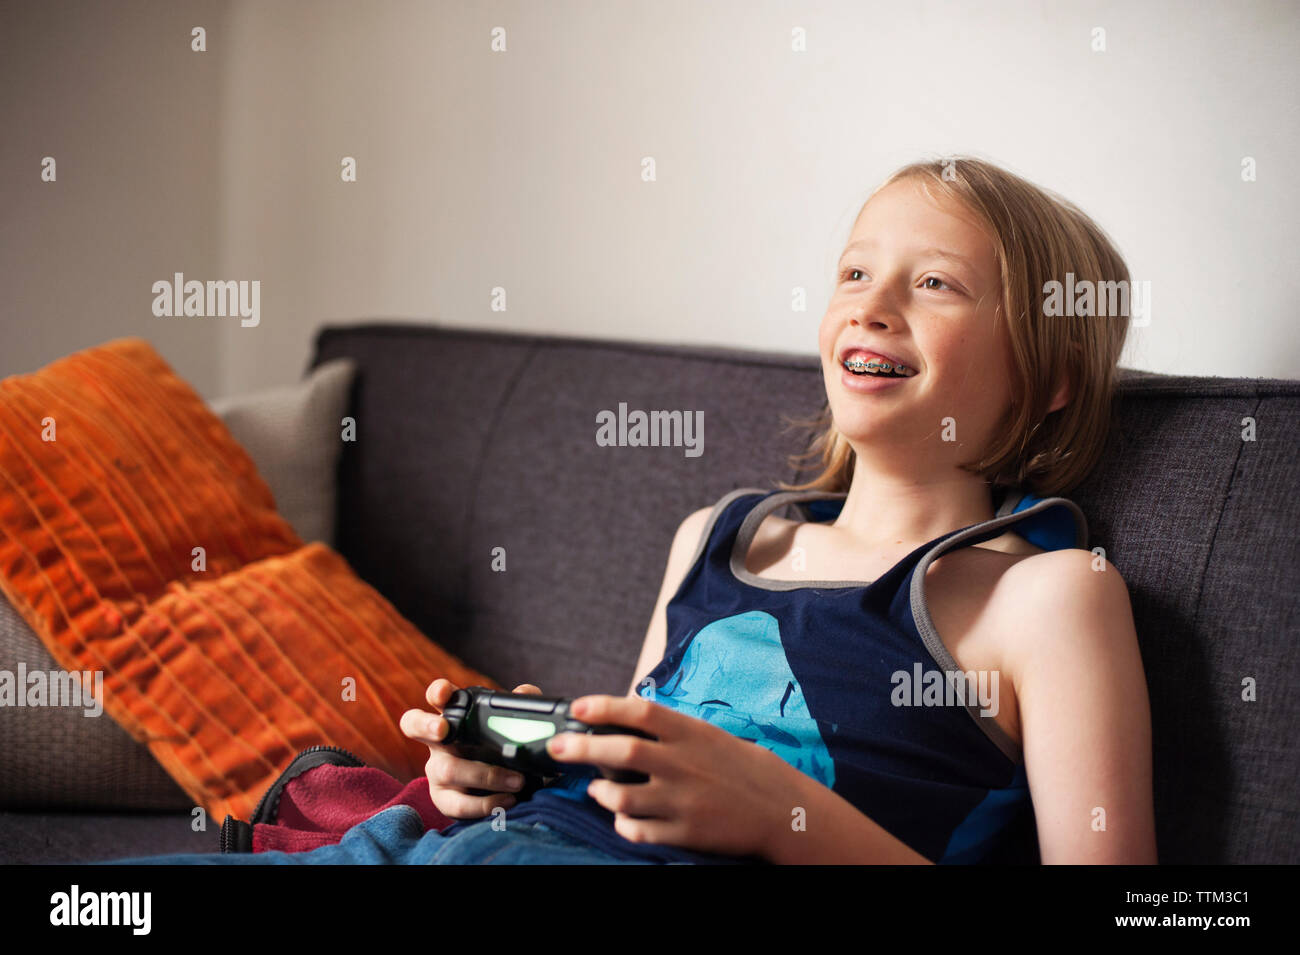 Happy boy sitting on sofa and playing video game Banque D'Images